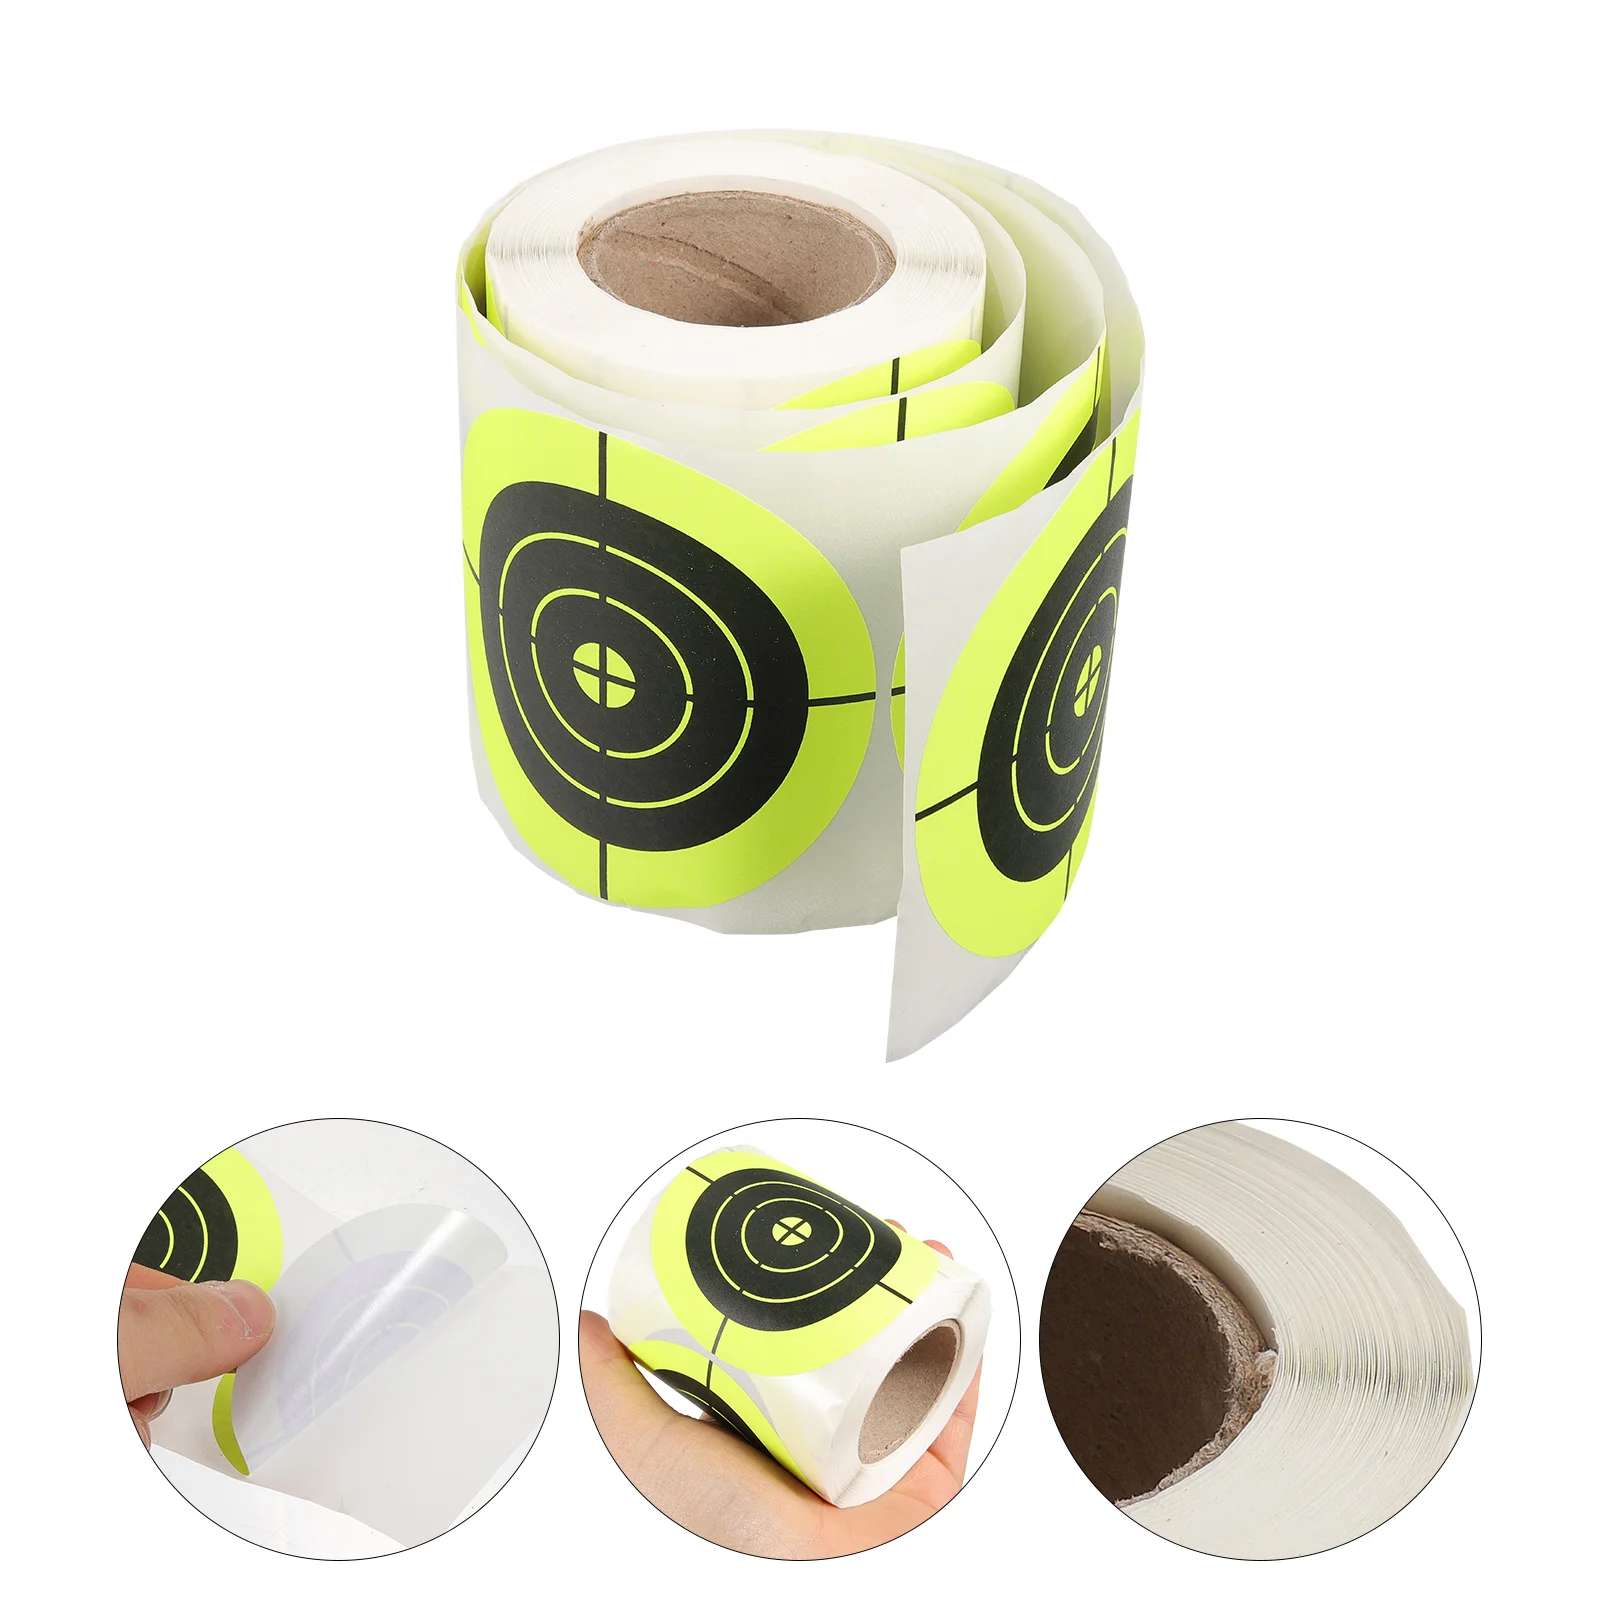 

Target Paper Practical Sticker Fluorescent Spot Shooting Targets Practice Stickers Game Round